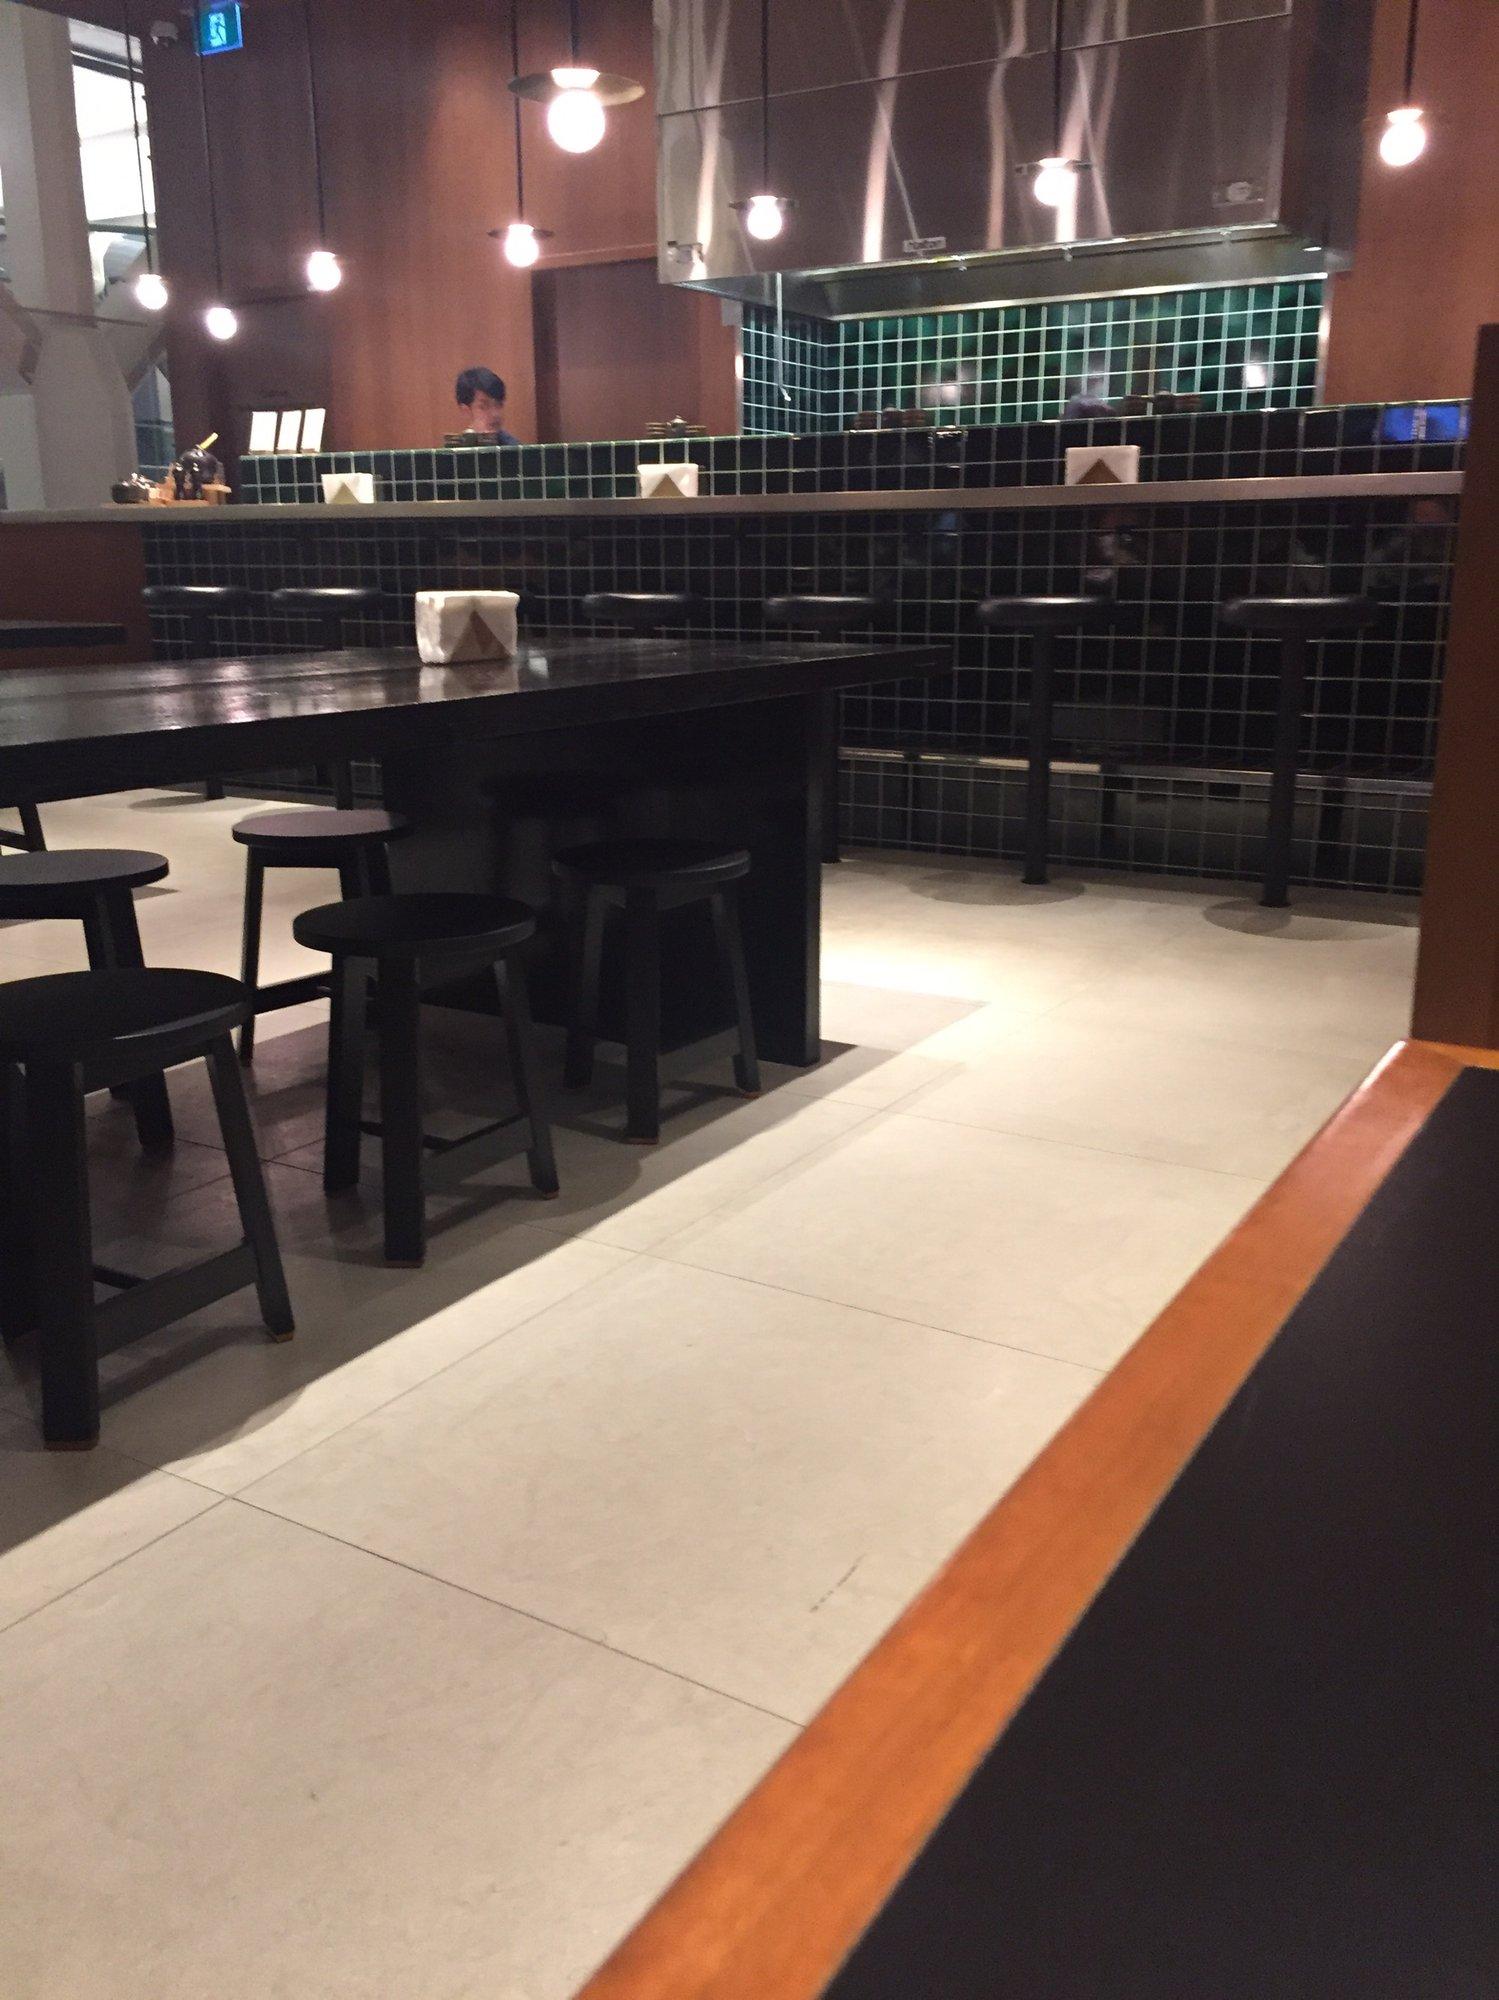 Cathay Pacific First and Business Class Lounge image 9 of 11